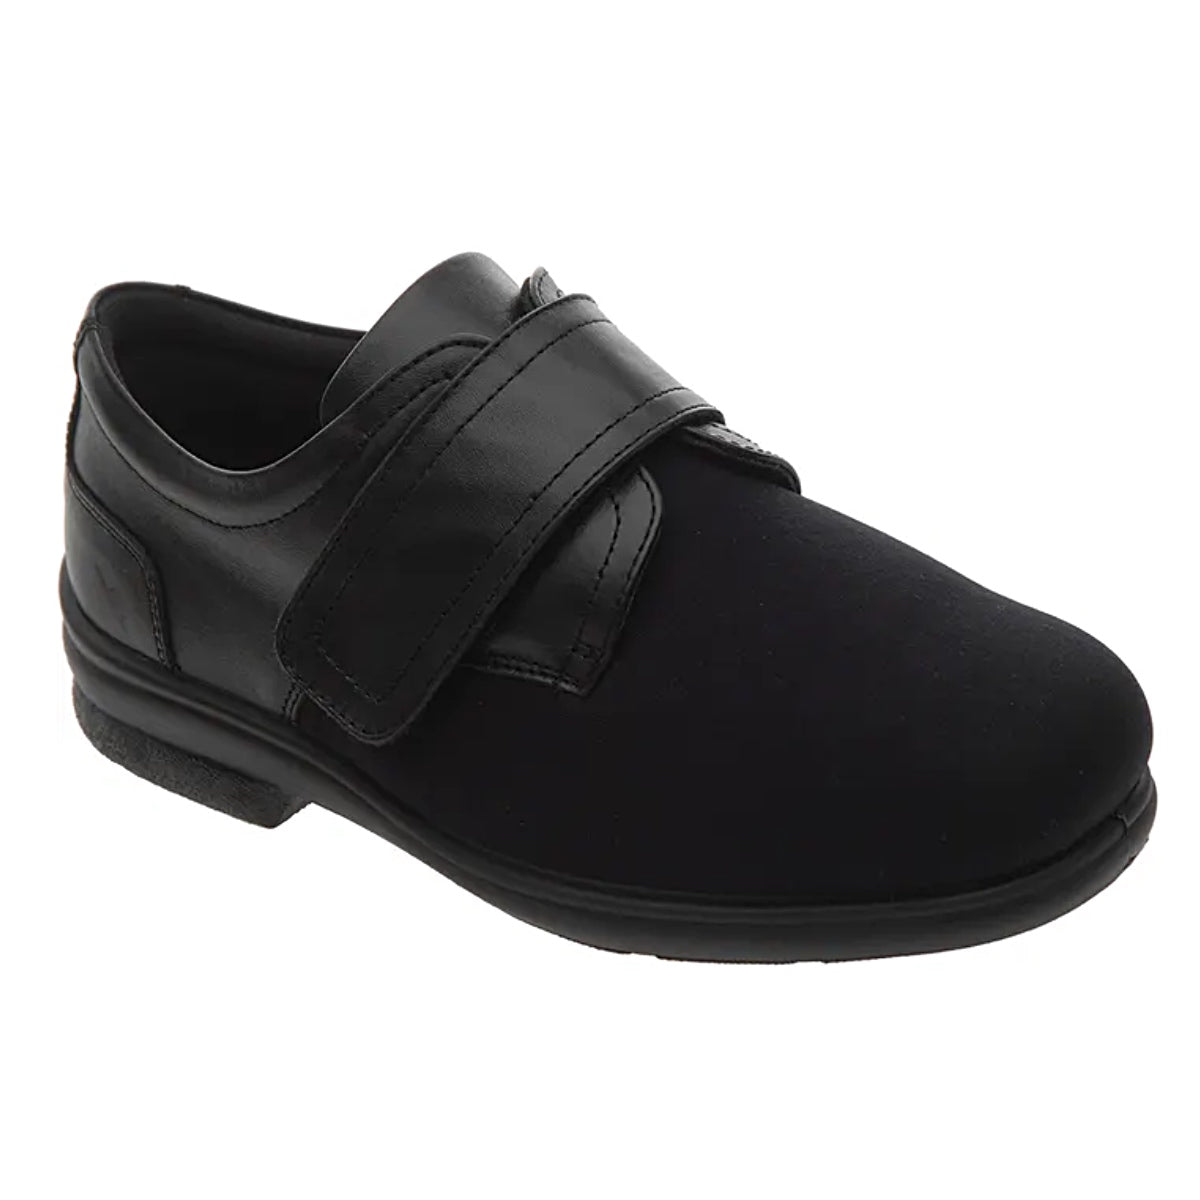 Ken. Soft, stretchy shoe ideal for bunions or swollen feet.